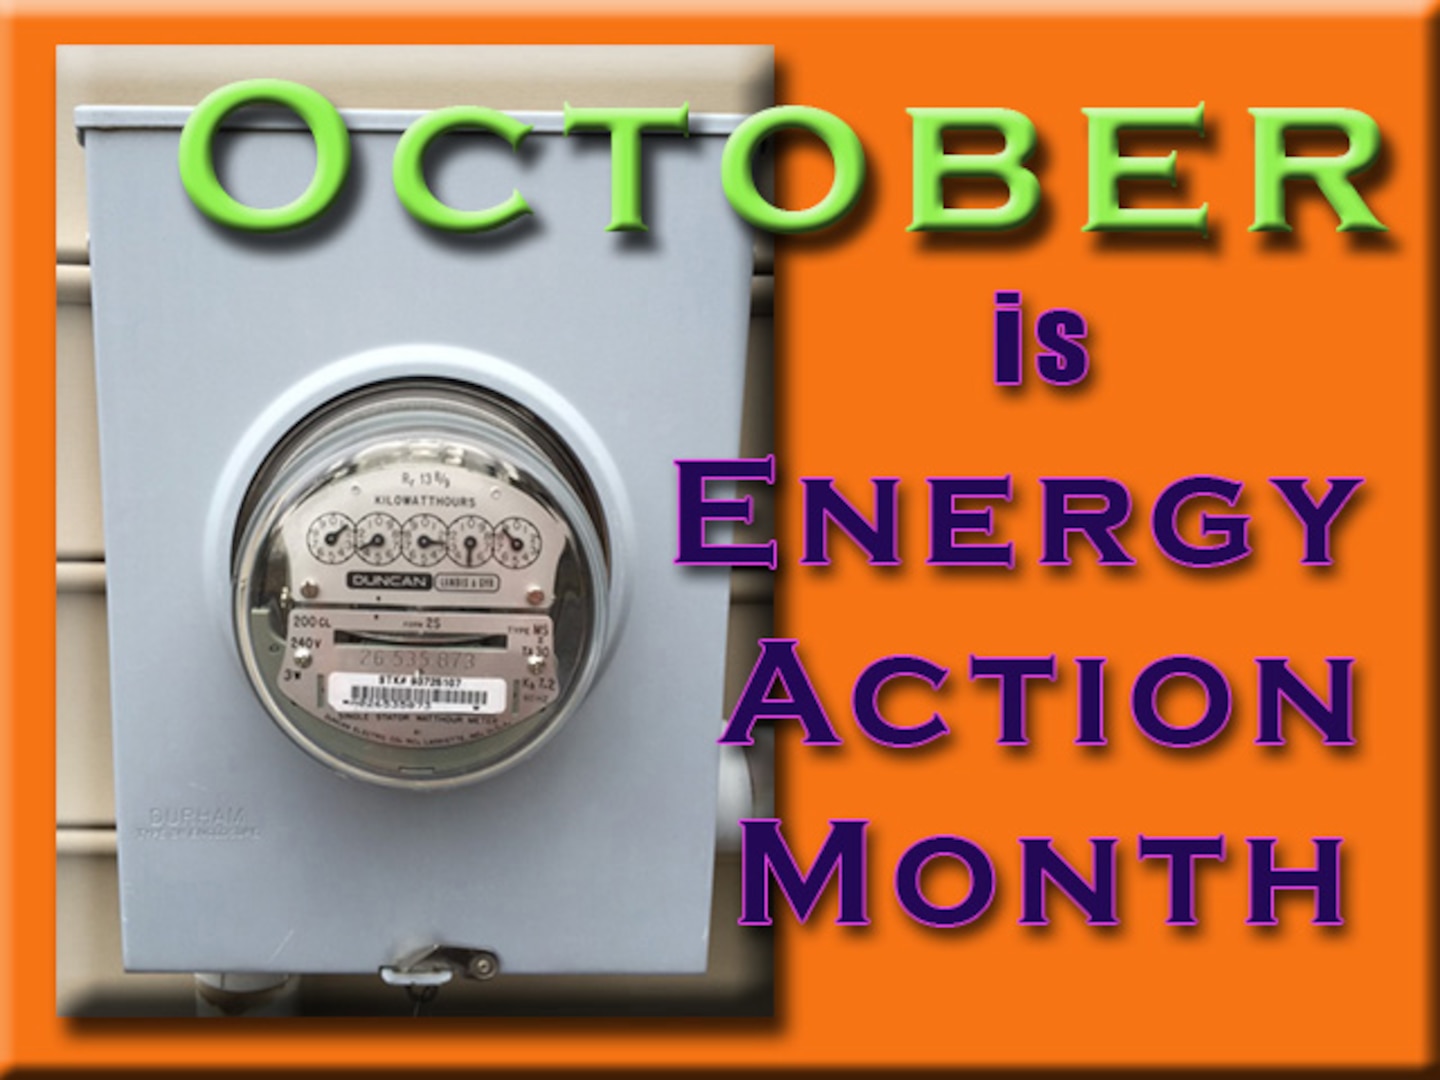 October is Energy Awareness Month. An Energy Month Fair will be held on Defense Supply Center Richmond, Virginia, Oct. 19, 2016 from 11 a.m. – 1 p.m. in the Center Restaurant to provide employees information about energy conservation and efficiency.  